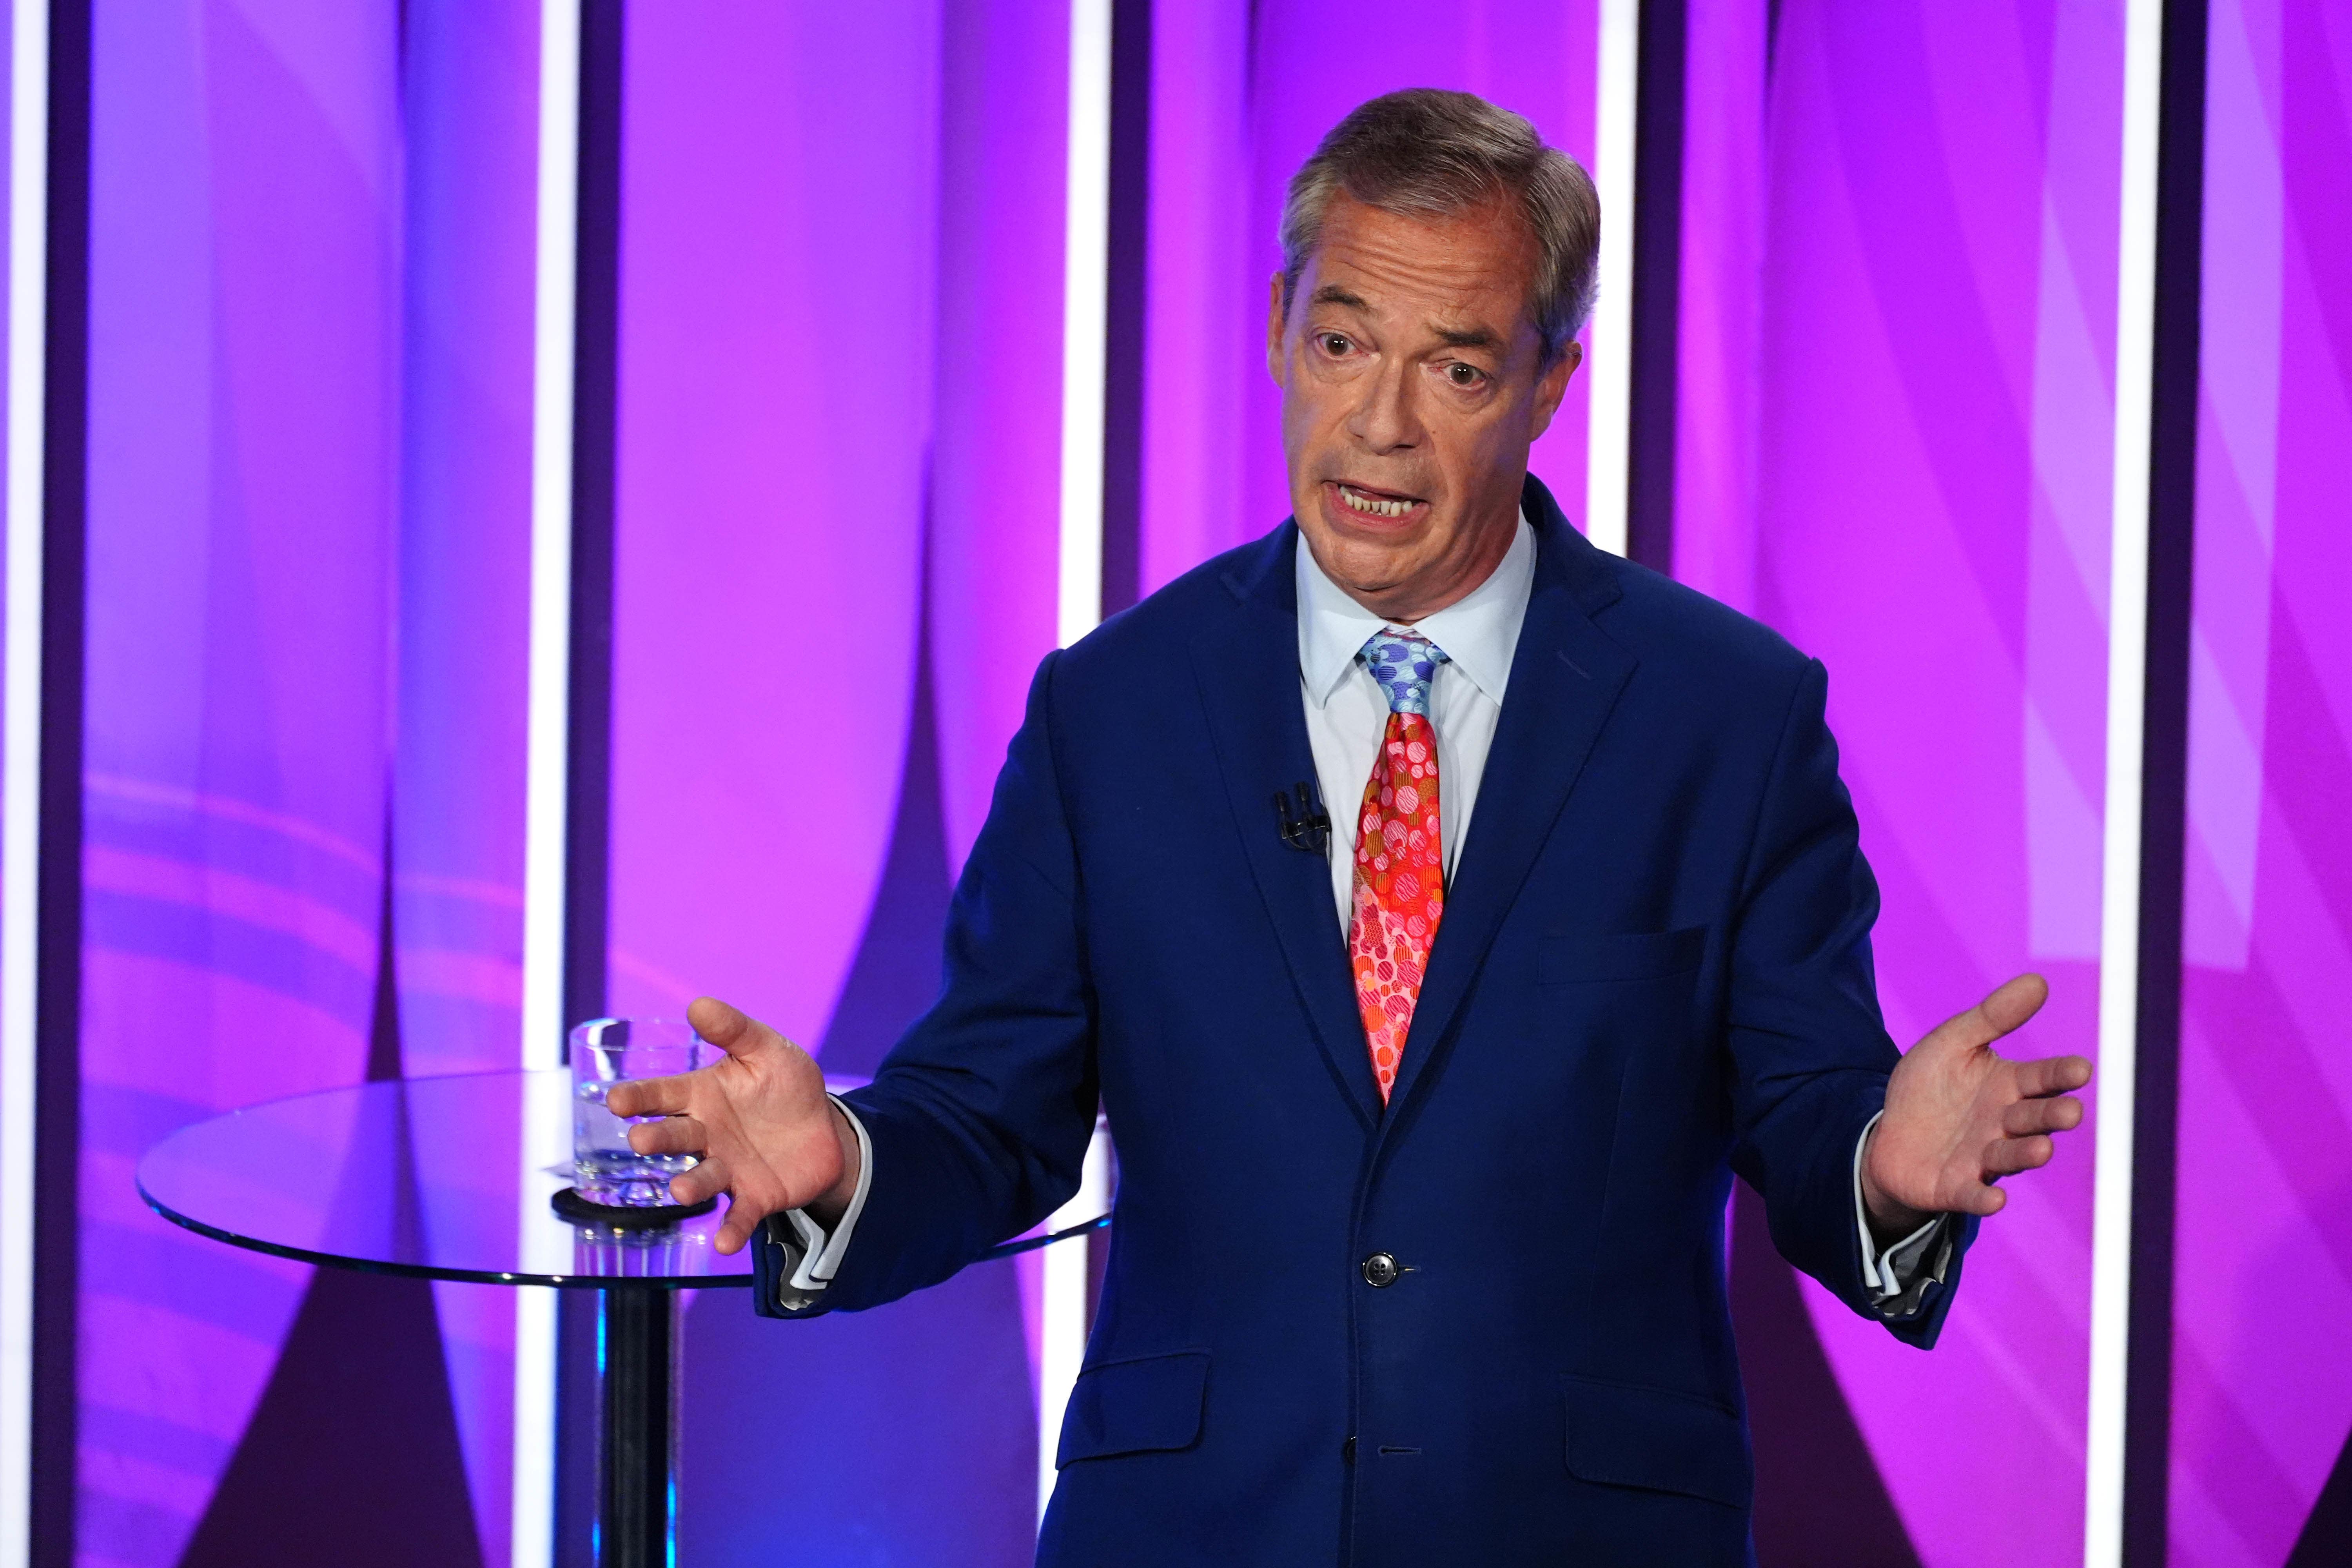 Reform UK leader Nigel Farage speaking during a BBC Question Time Leaders’ Special (Peter Byrne/PA)